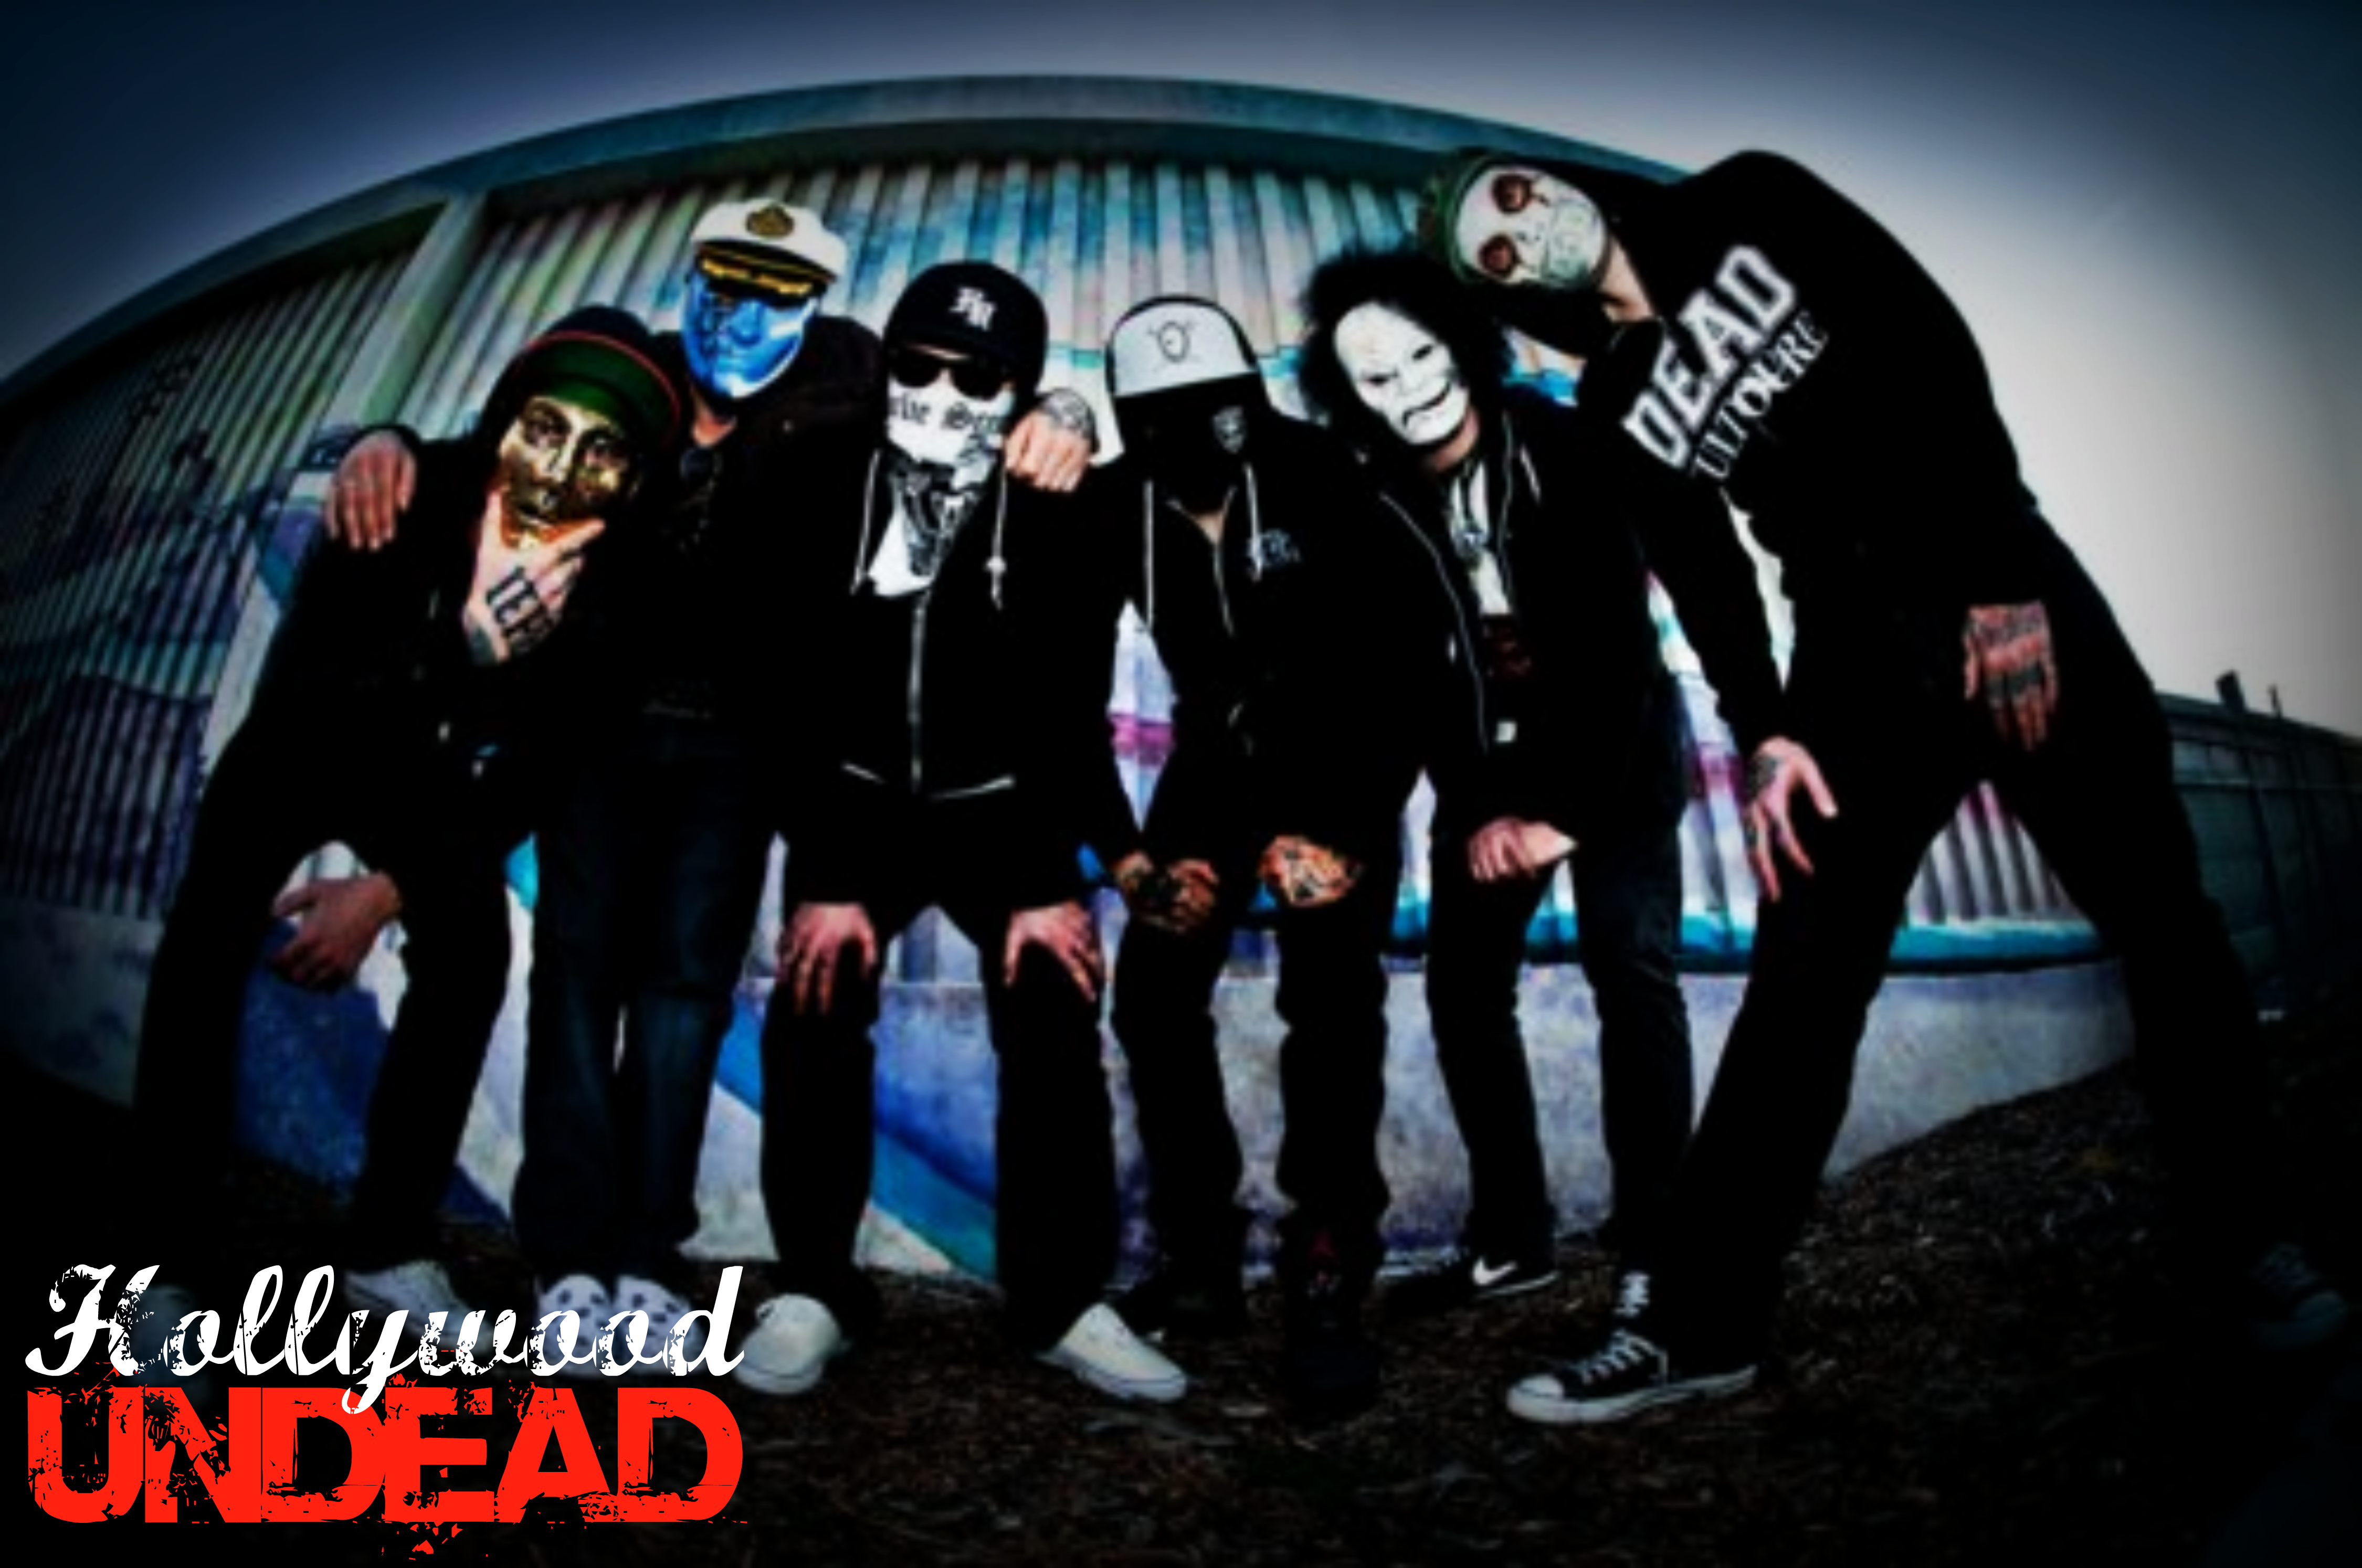 hollywood undead wallpaper,social group,snapshot,youth,photography,cool